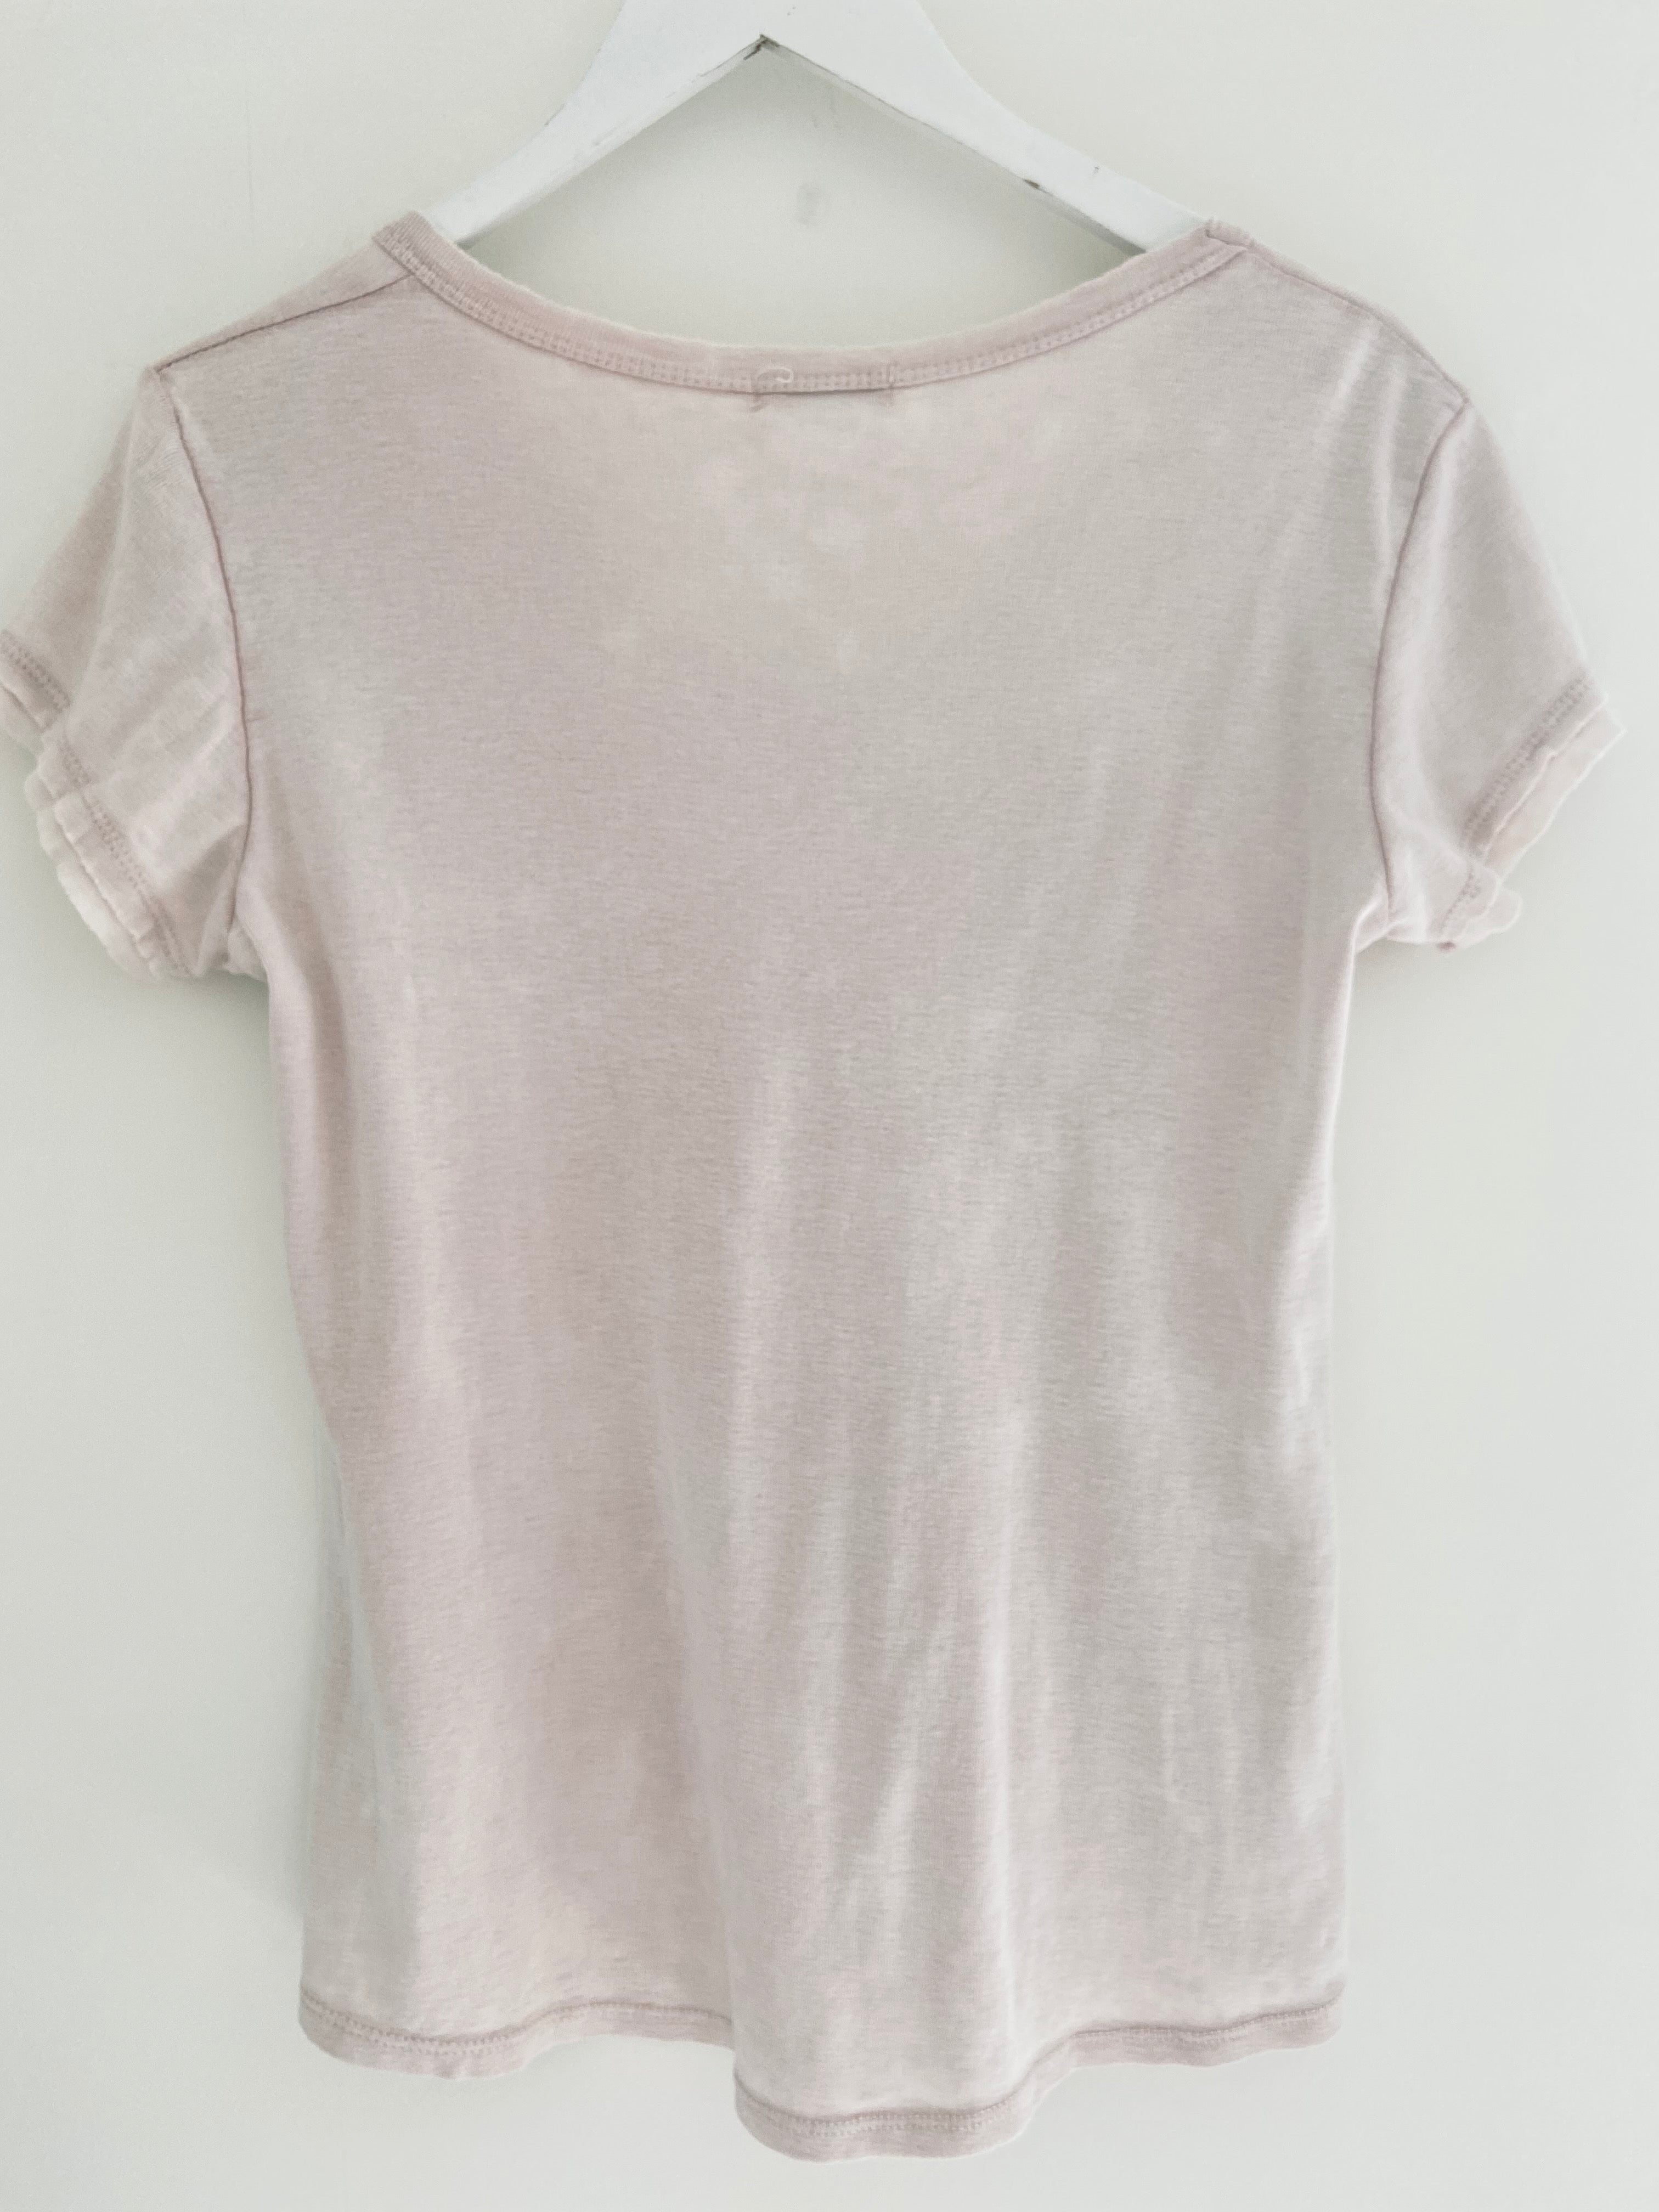 Vintage Star Tee in Shell Pink